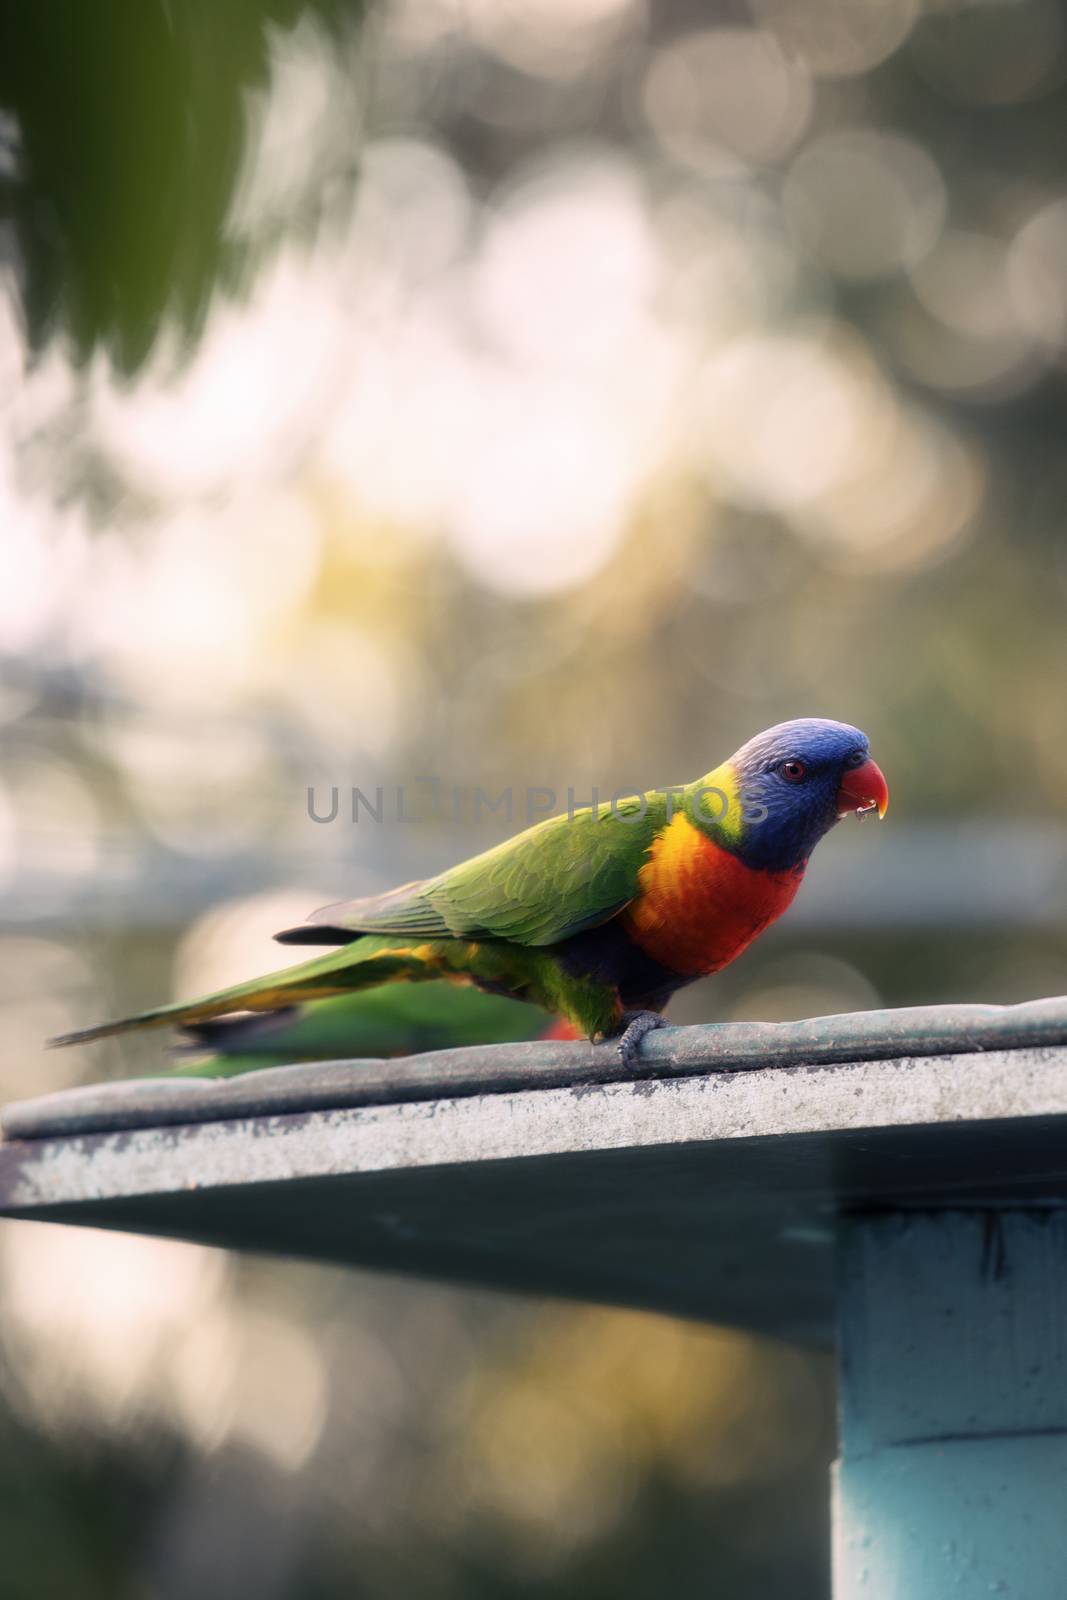 Rainbow lorikeet outside during the day. by artistrobd